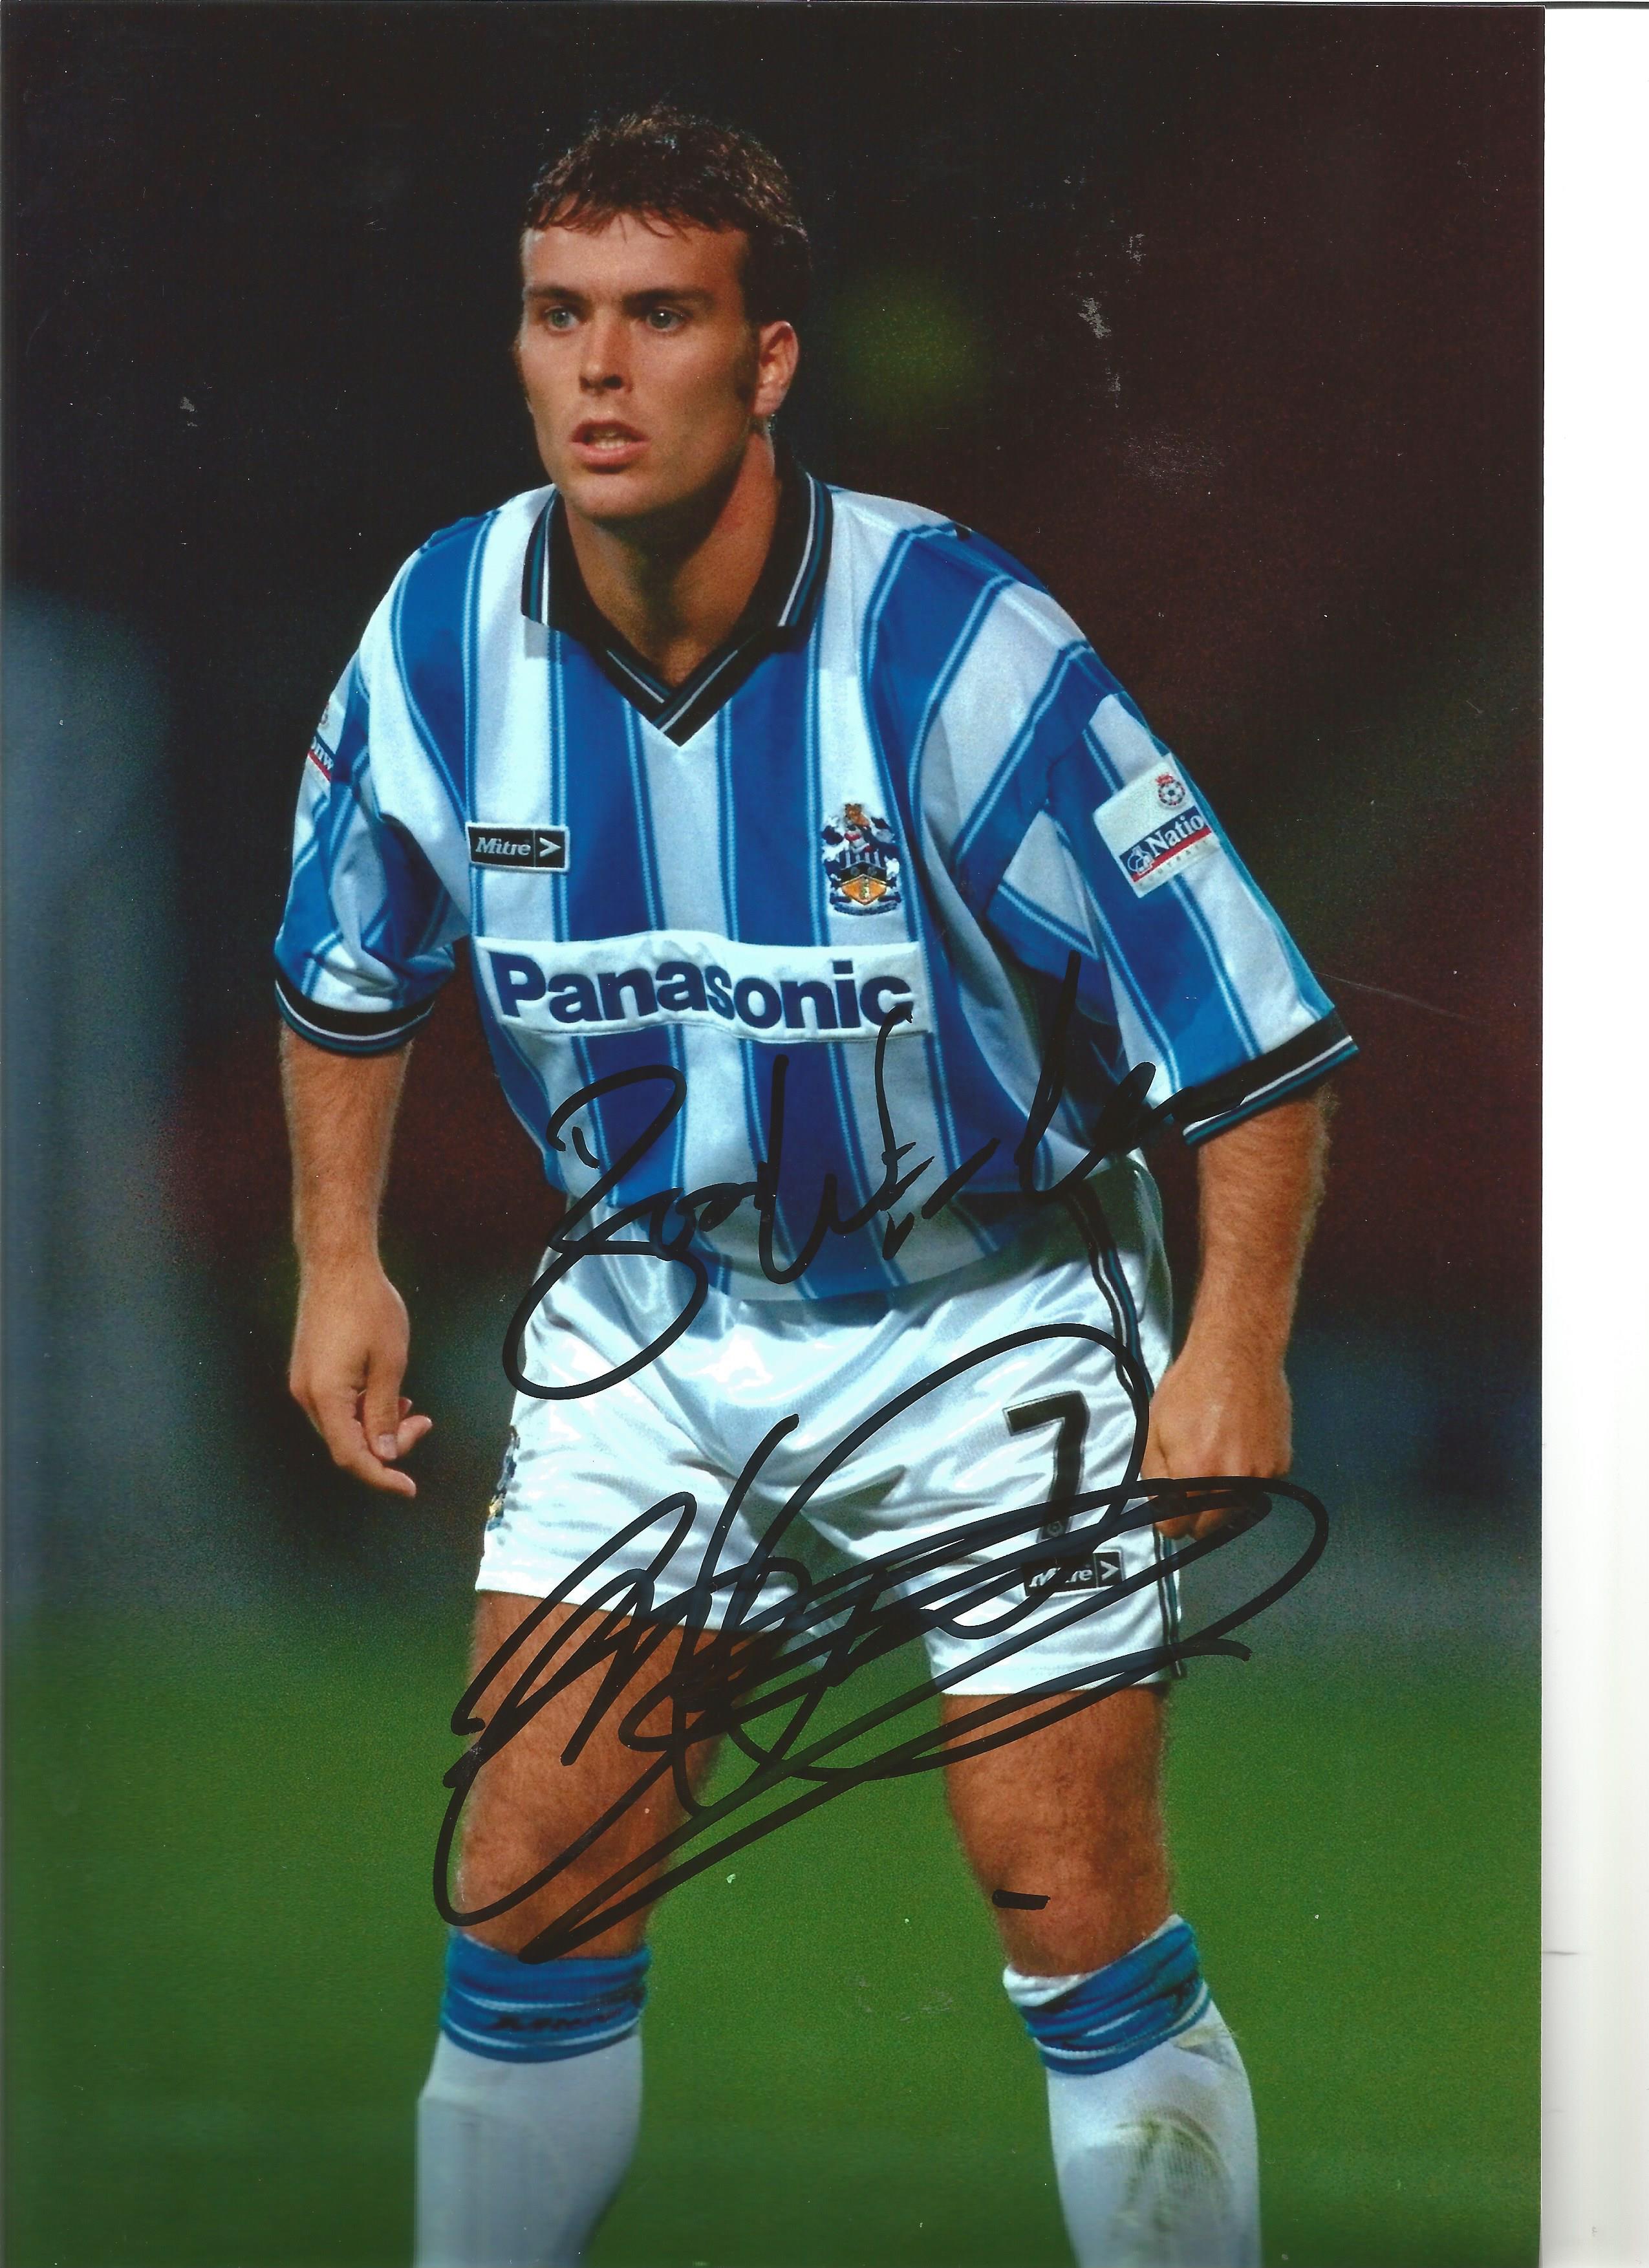 Football Ben Thornley 12x8 Signed Colour Photo Pictured In Action For Huddersfield Town. Good